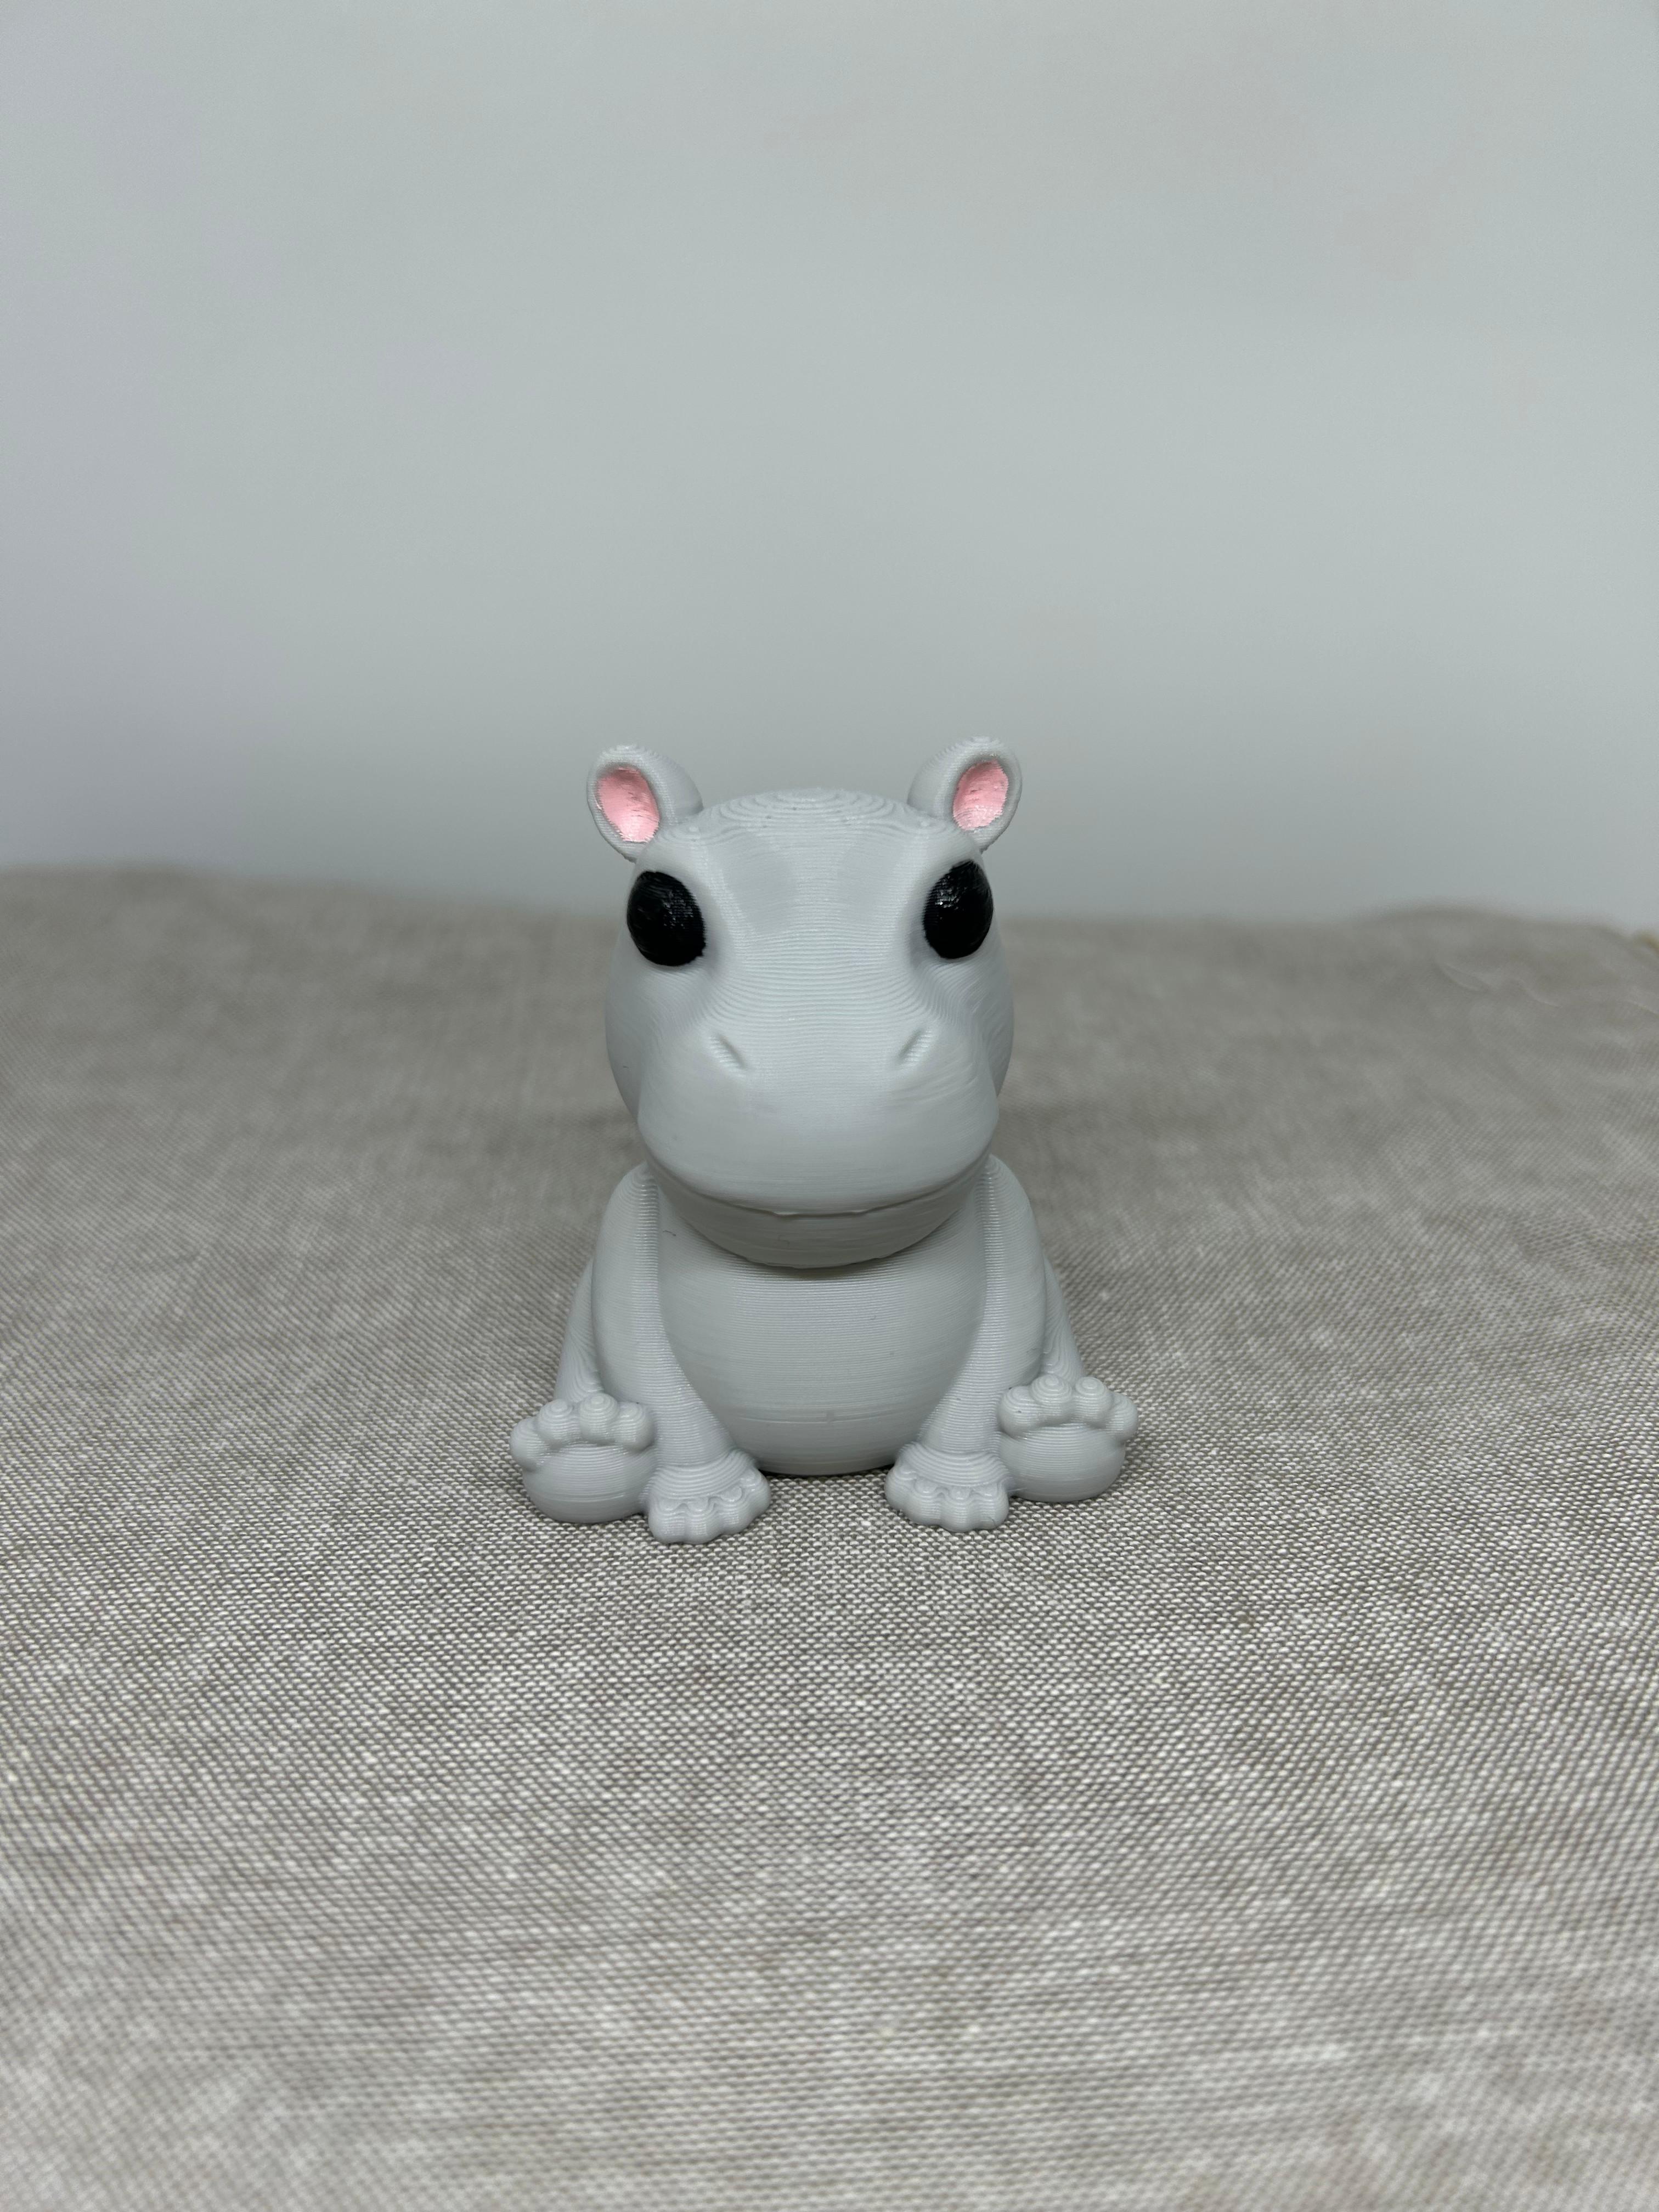 Sitting Hippo Solid 3d model